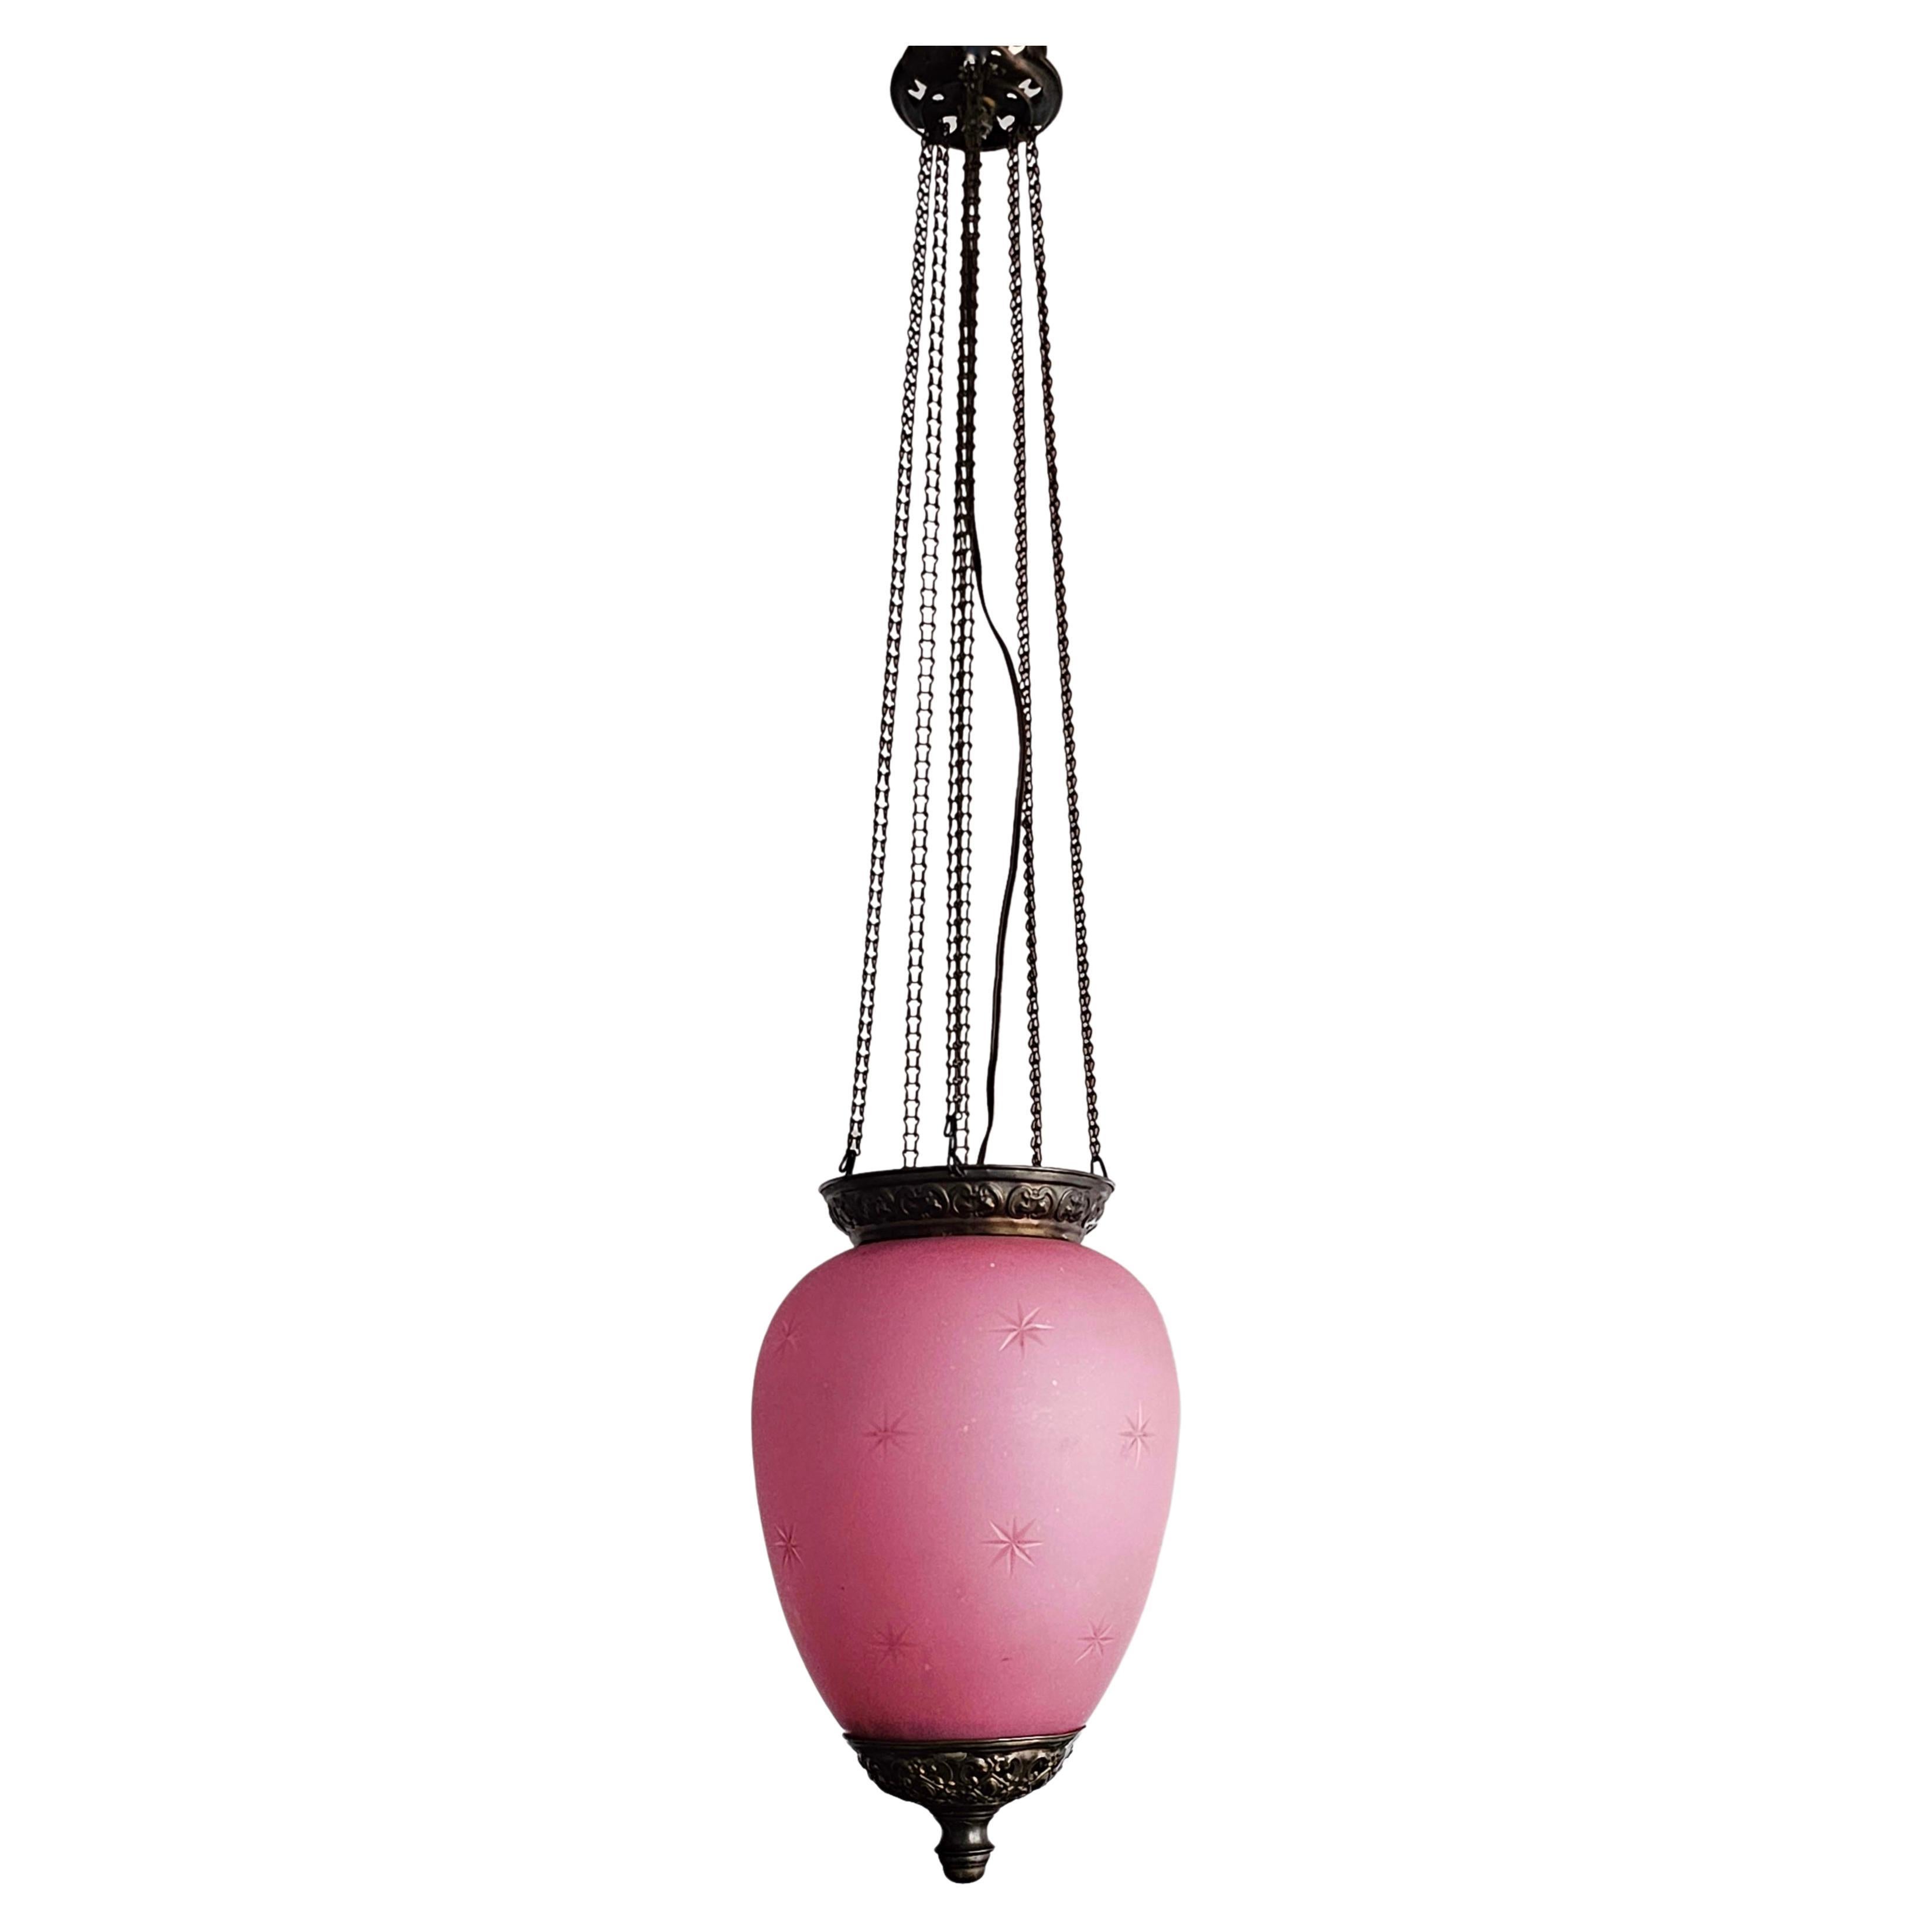 Antique Pink Glass and Brass Lantern, Austria cca. 1850s For Sale